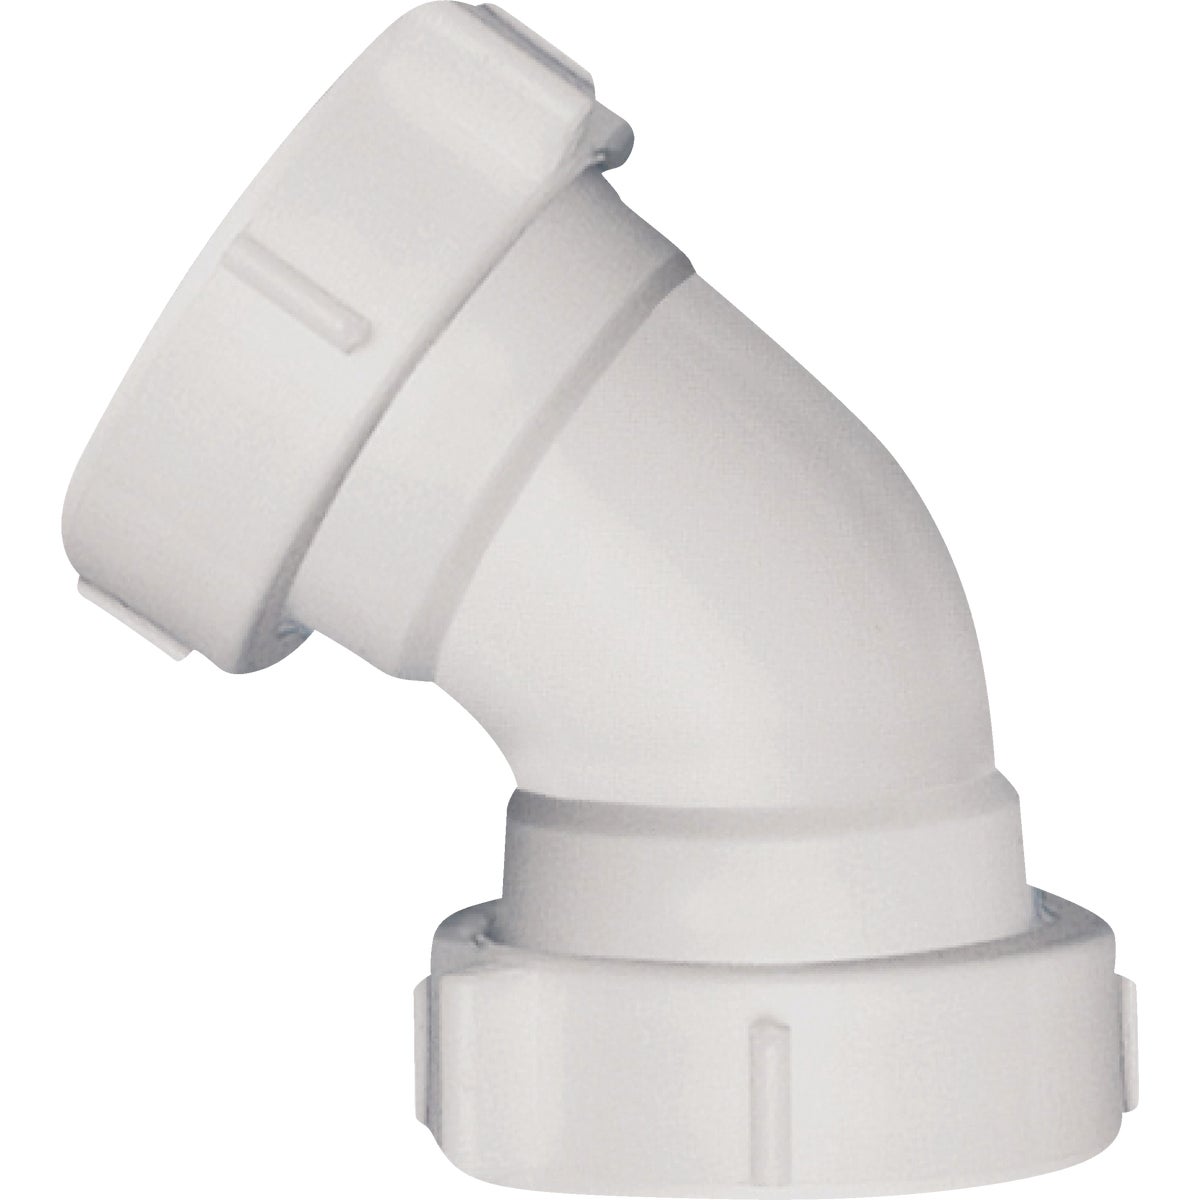 Item 444588, Keeney 45 Degree white coupling elbow allows for slip joint connections, 